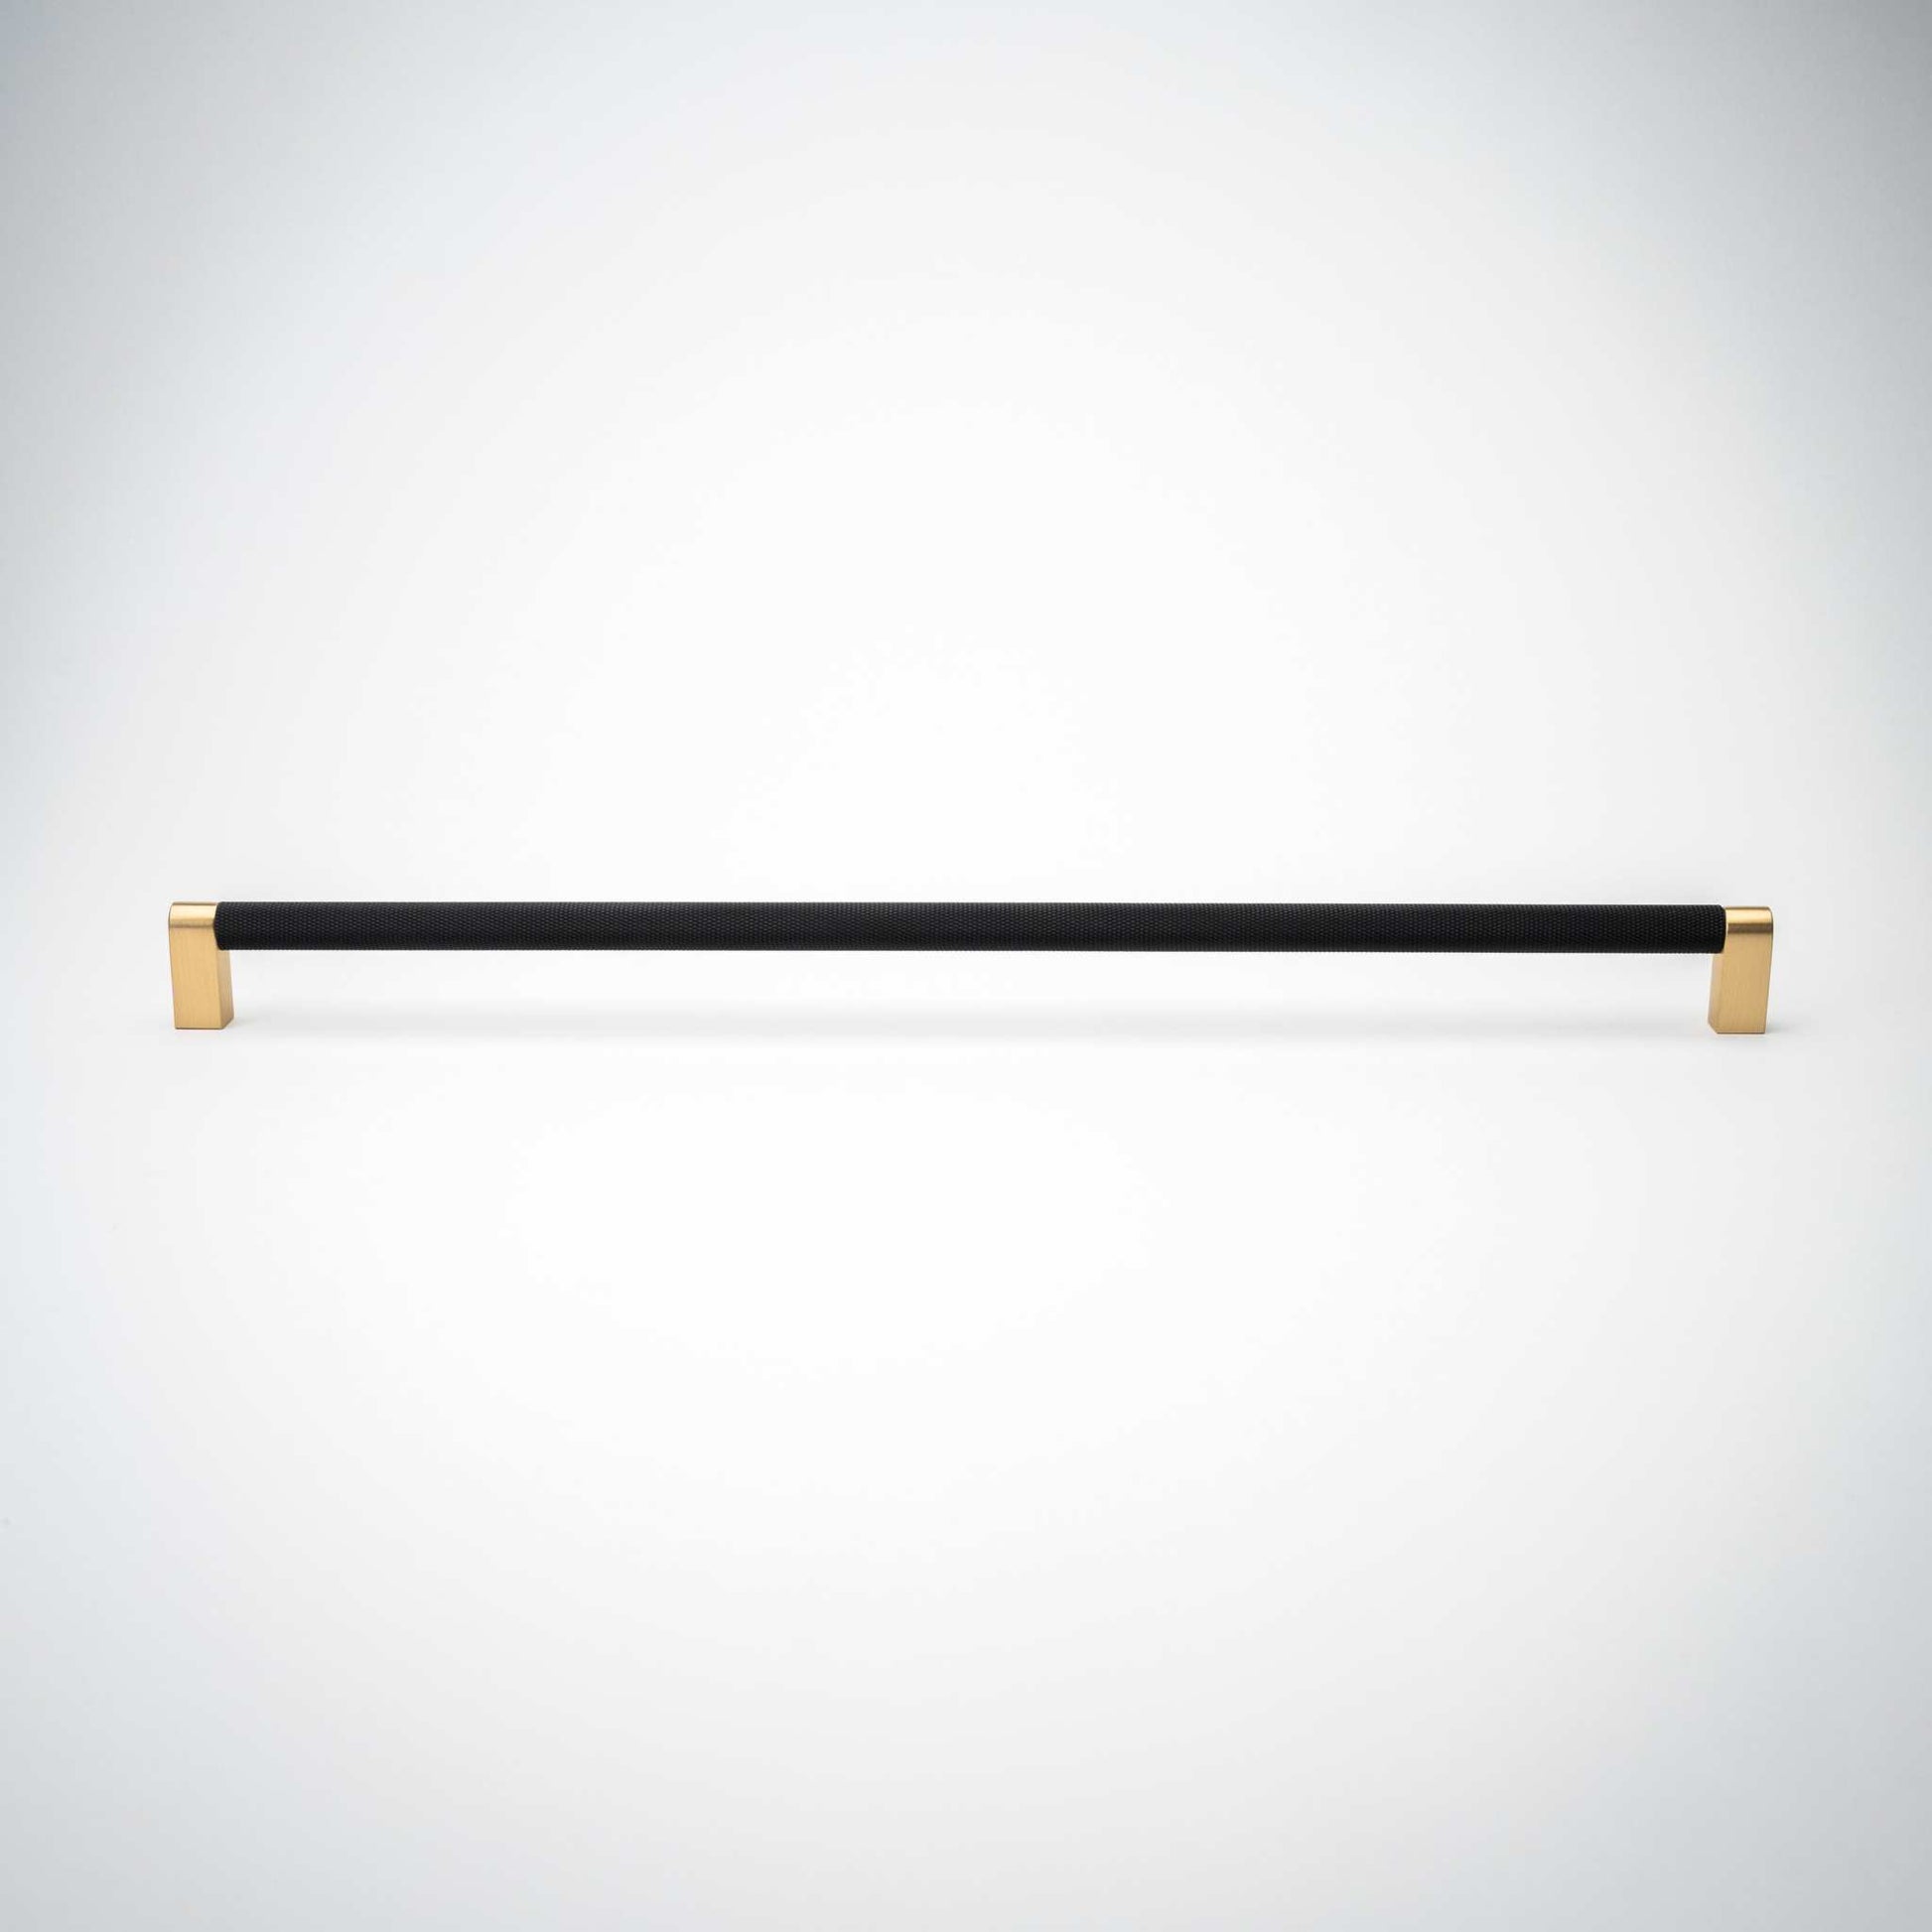 Bold, Black & Gold Knurled Cabinet PullsGo BOLD in your home!Our Bold, Black and "gold" cabinet pull brings a modern feel to your cabinetry. Its two-toned style is visually fresh, while its knurled matpullBold, Black & Gold Knurled Solid Brass Cabinet Pulls